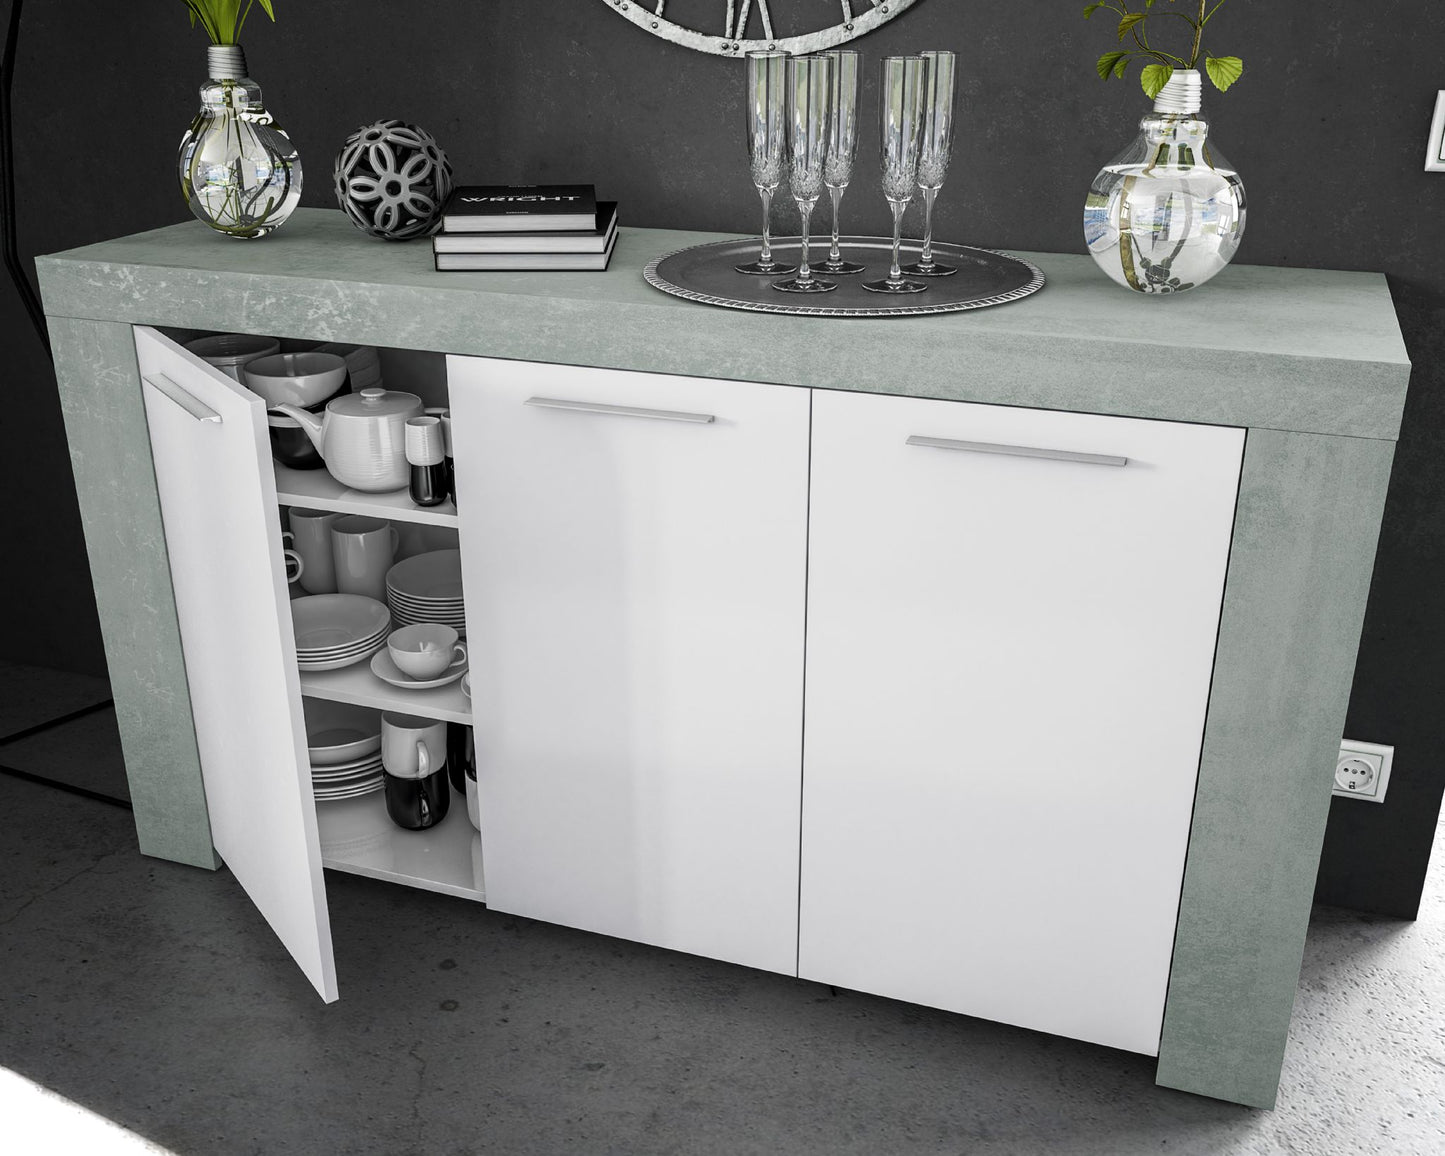 Alpine White Soft Gloss and Concrete Grey Sideboard